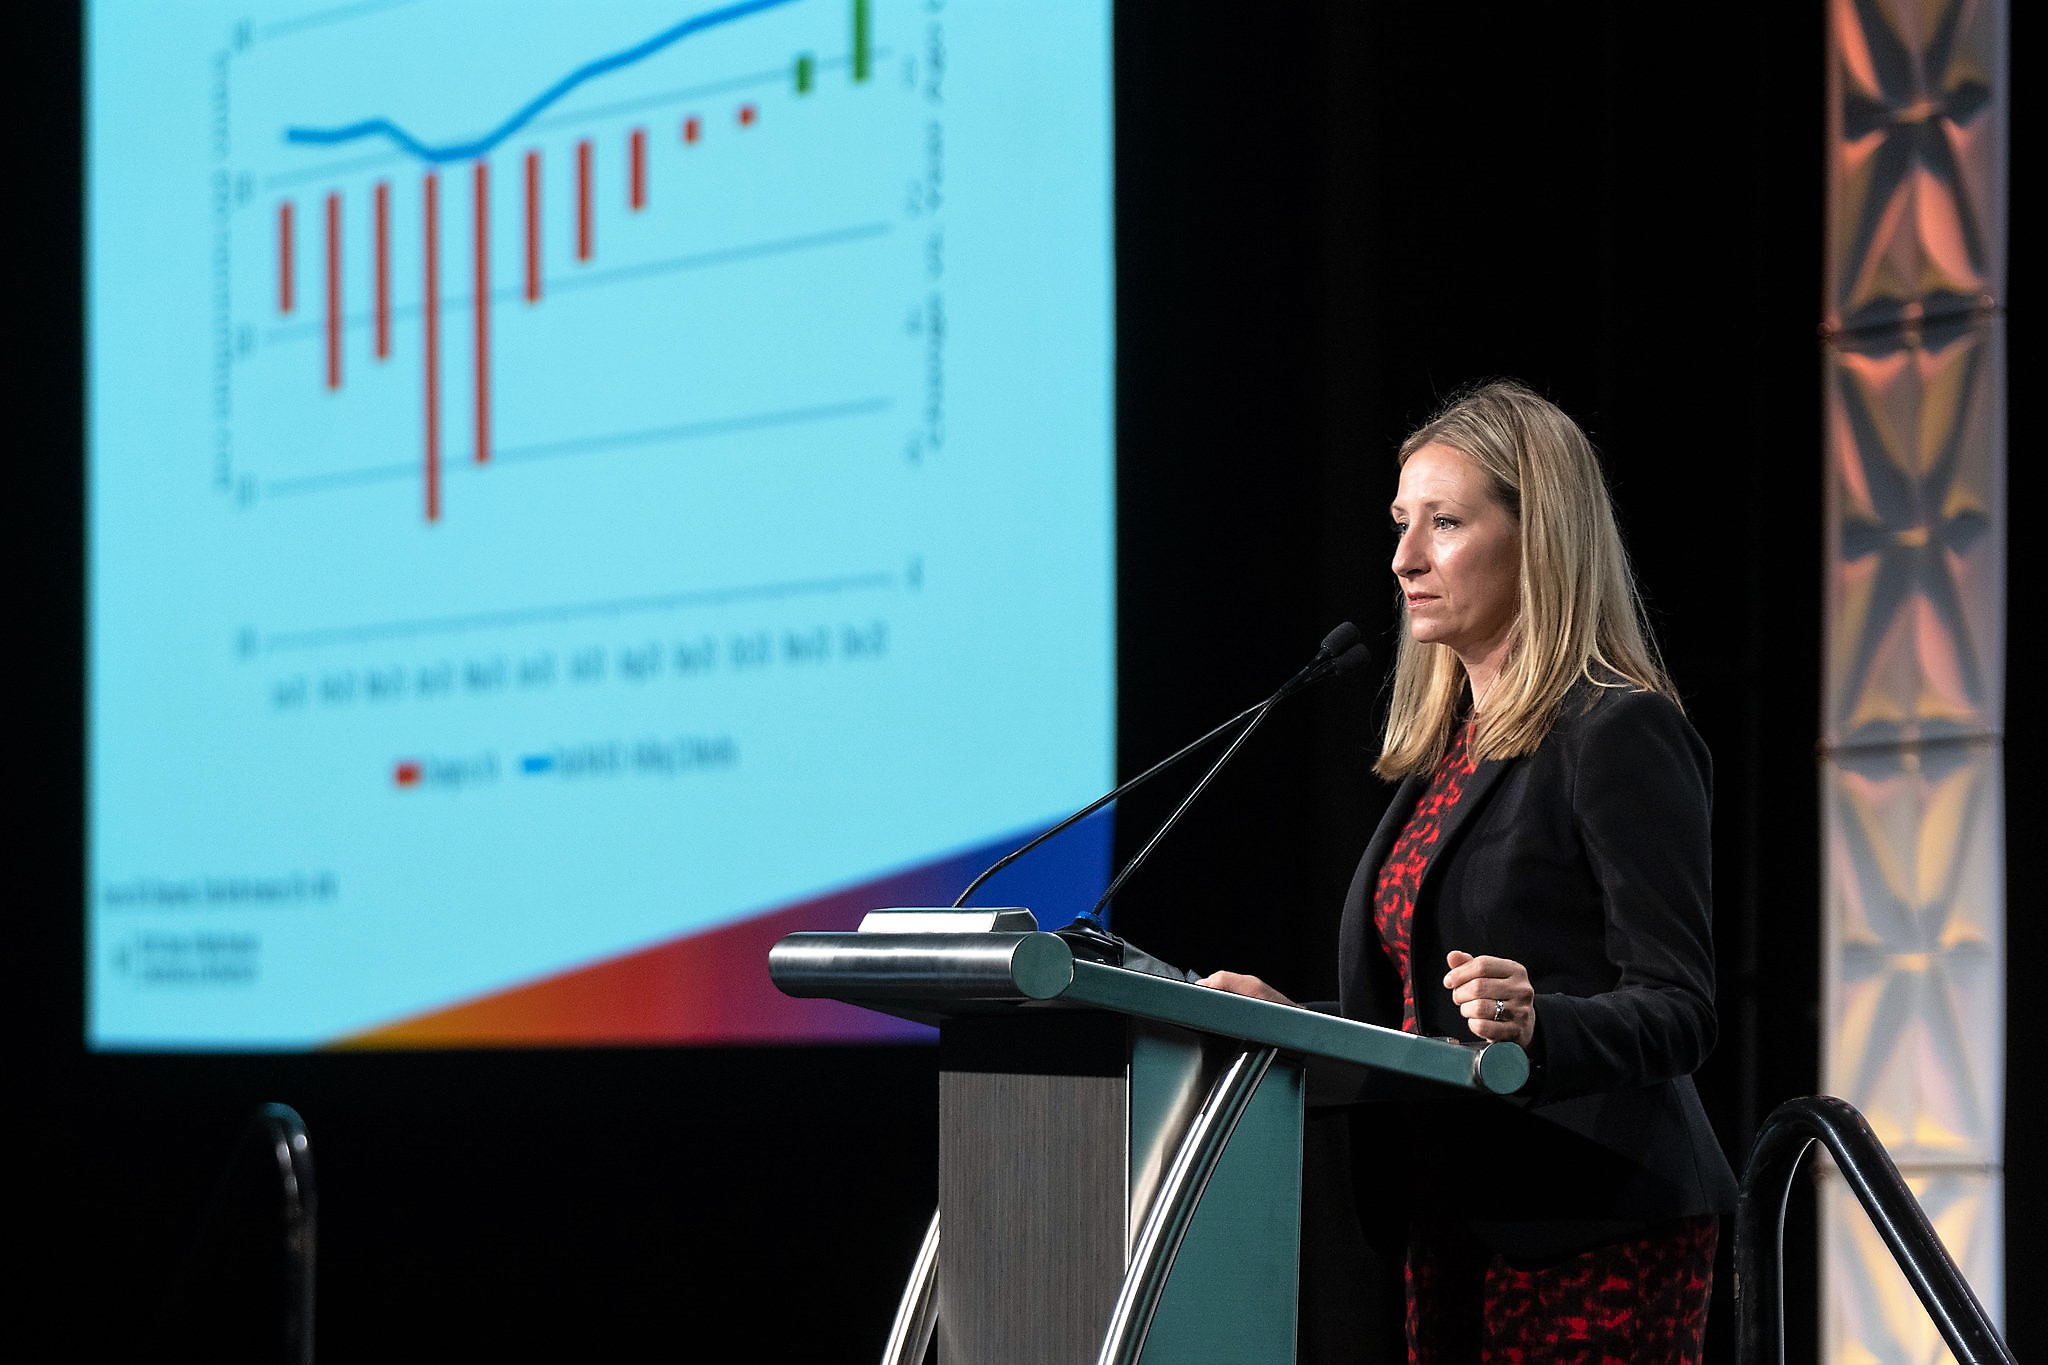 Rebecca Conway presents on transportation market update